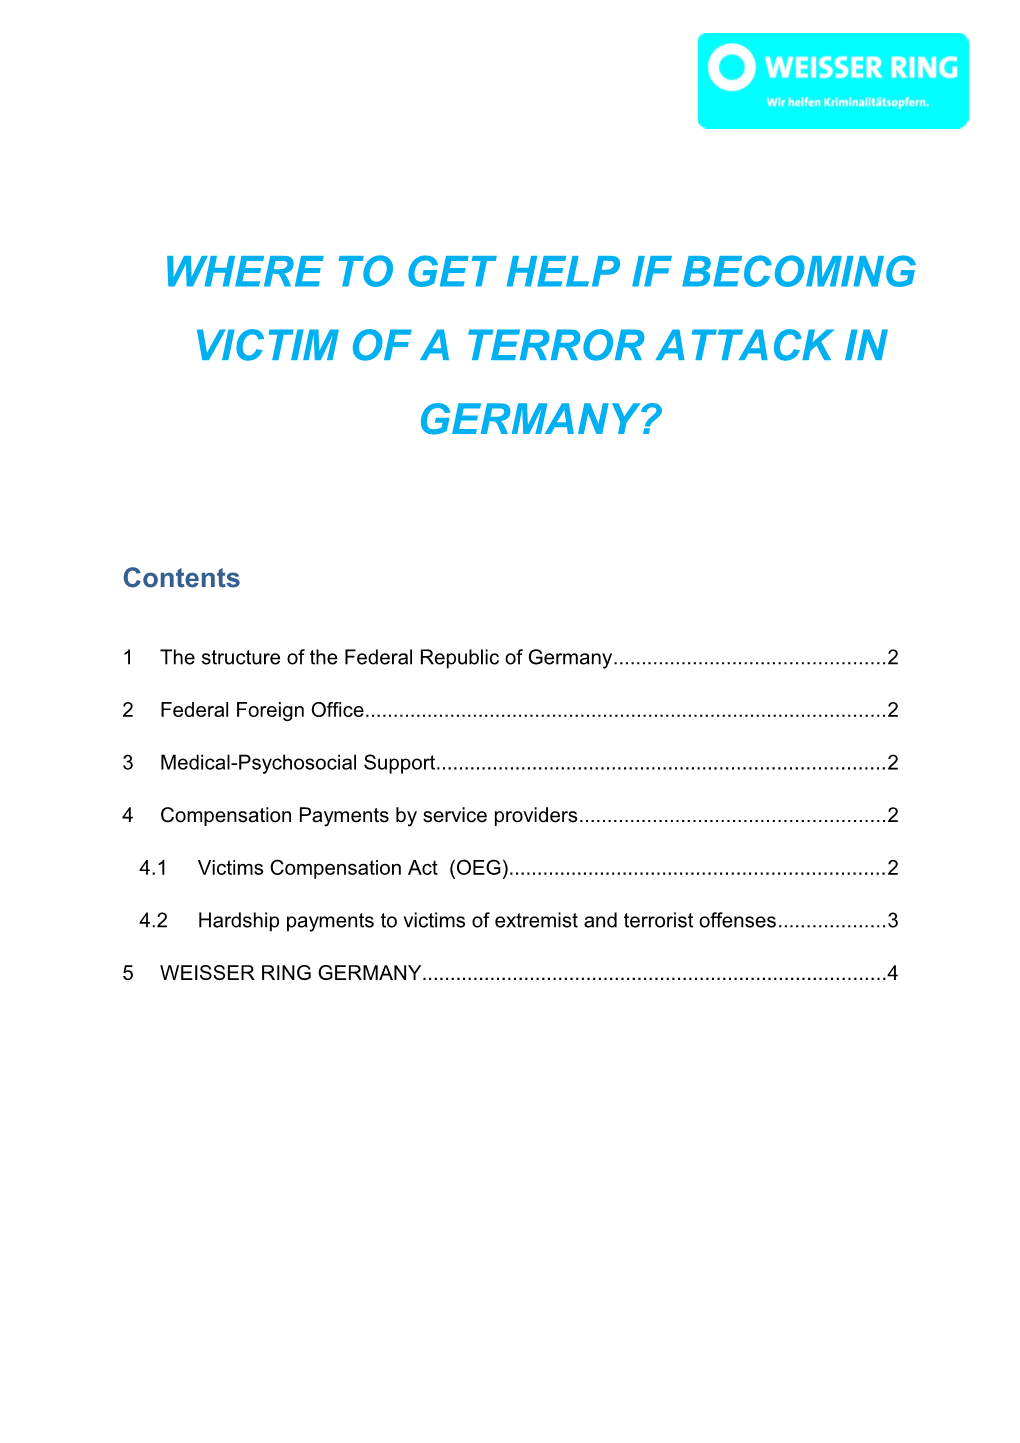 Where to Get Help If Becoming Victim of a Terror Attack in Germany?